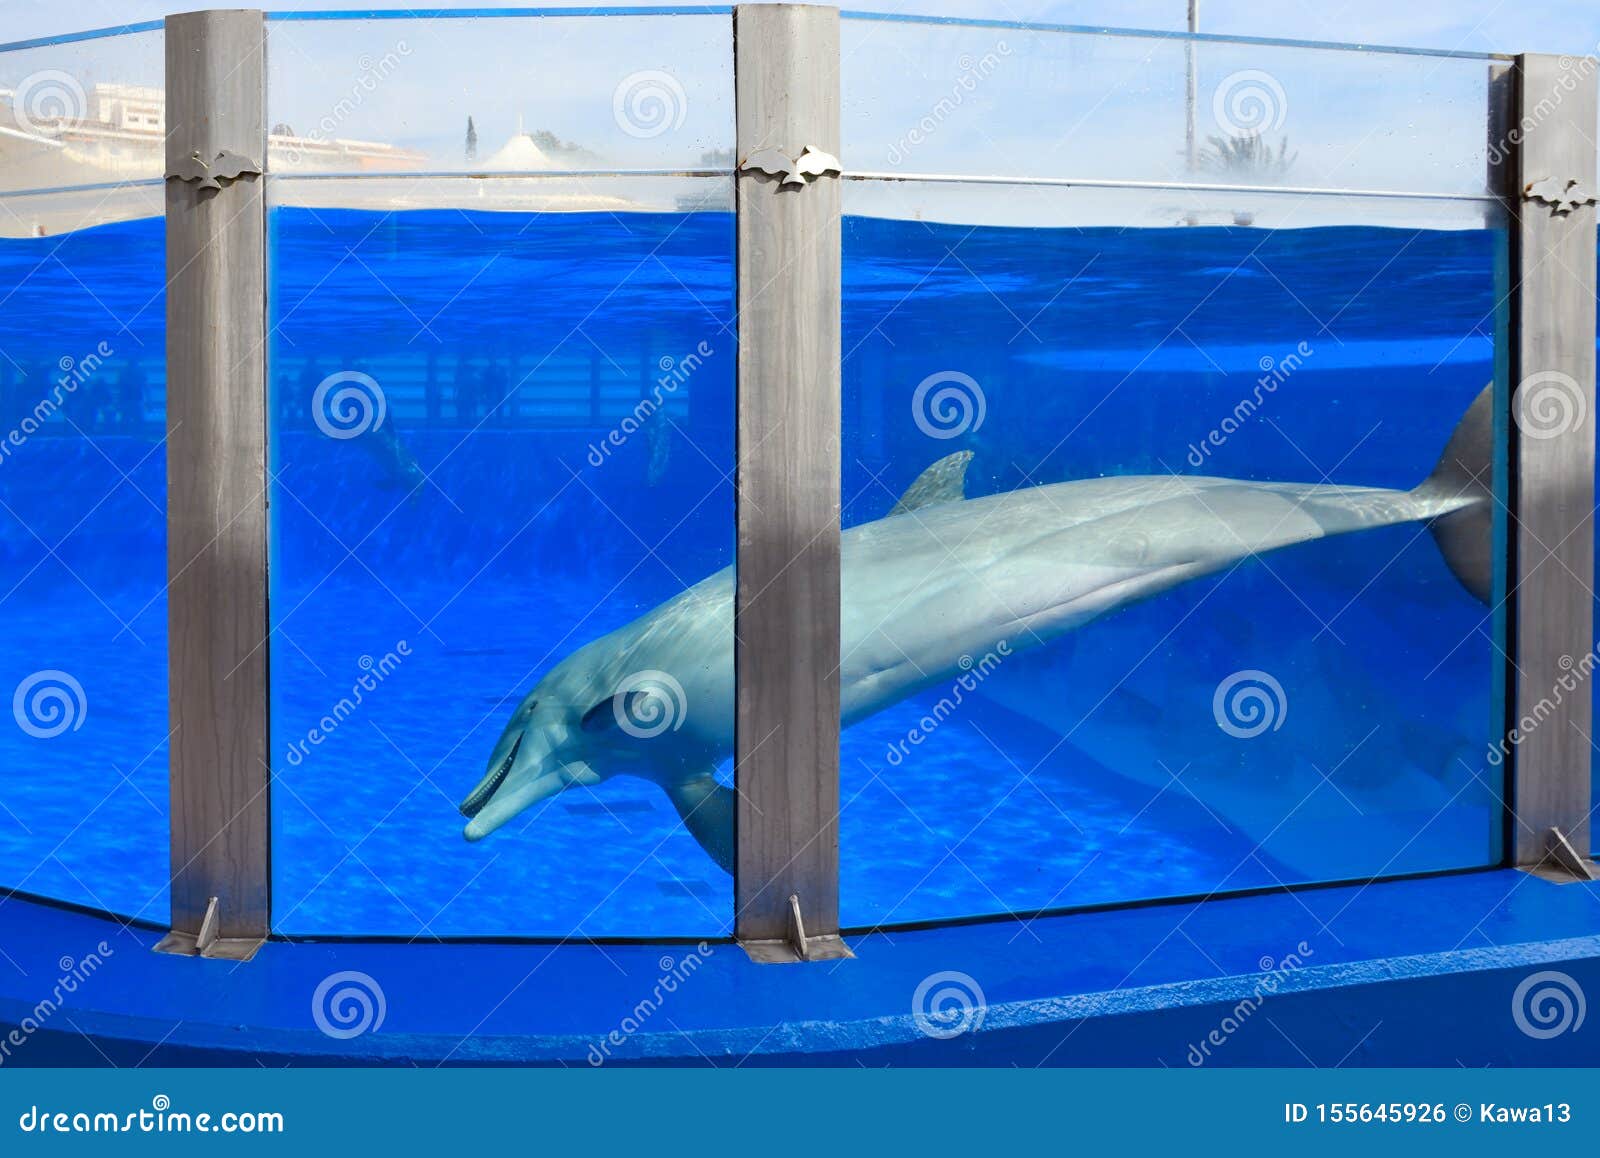 A Dolphin in a Pool at Marineland on Mallorca, Spain Stock Photo ...